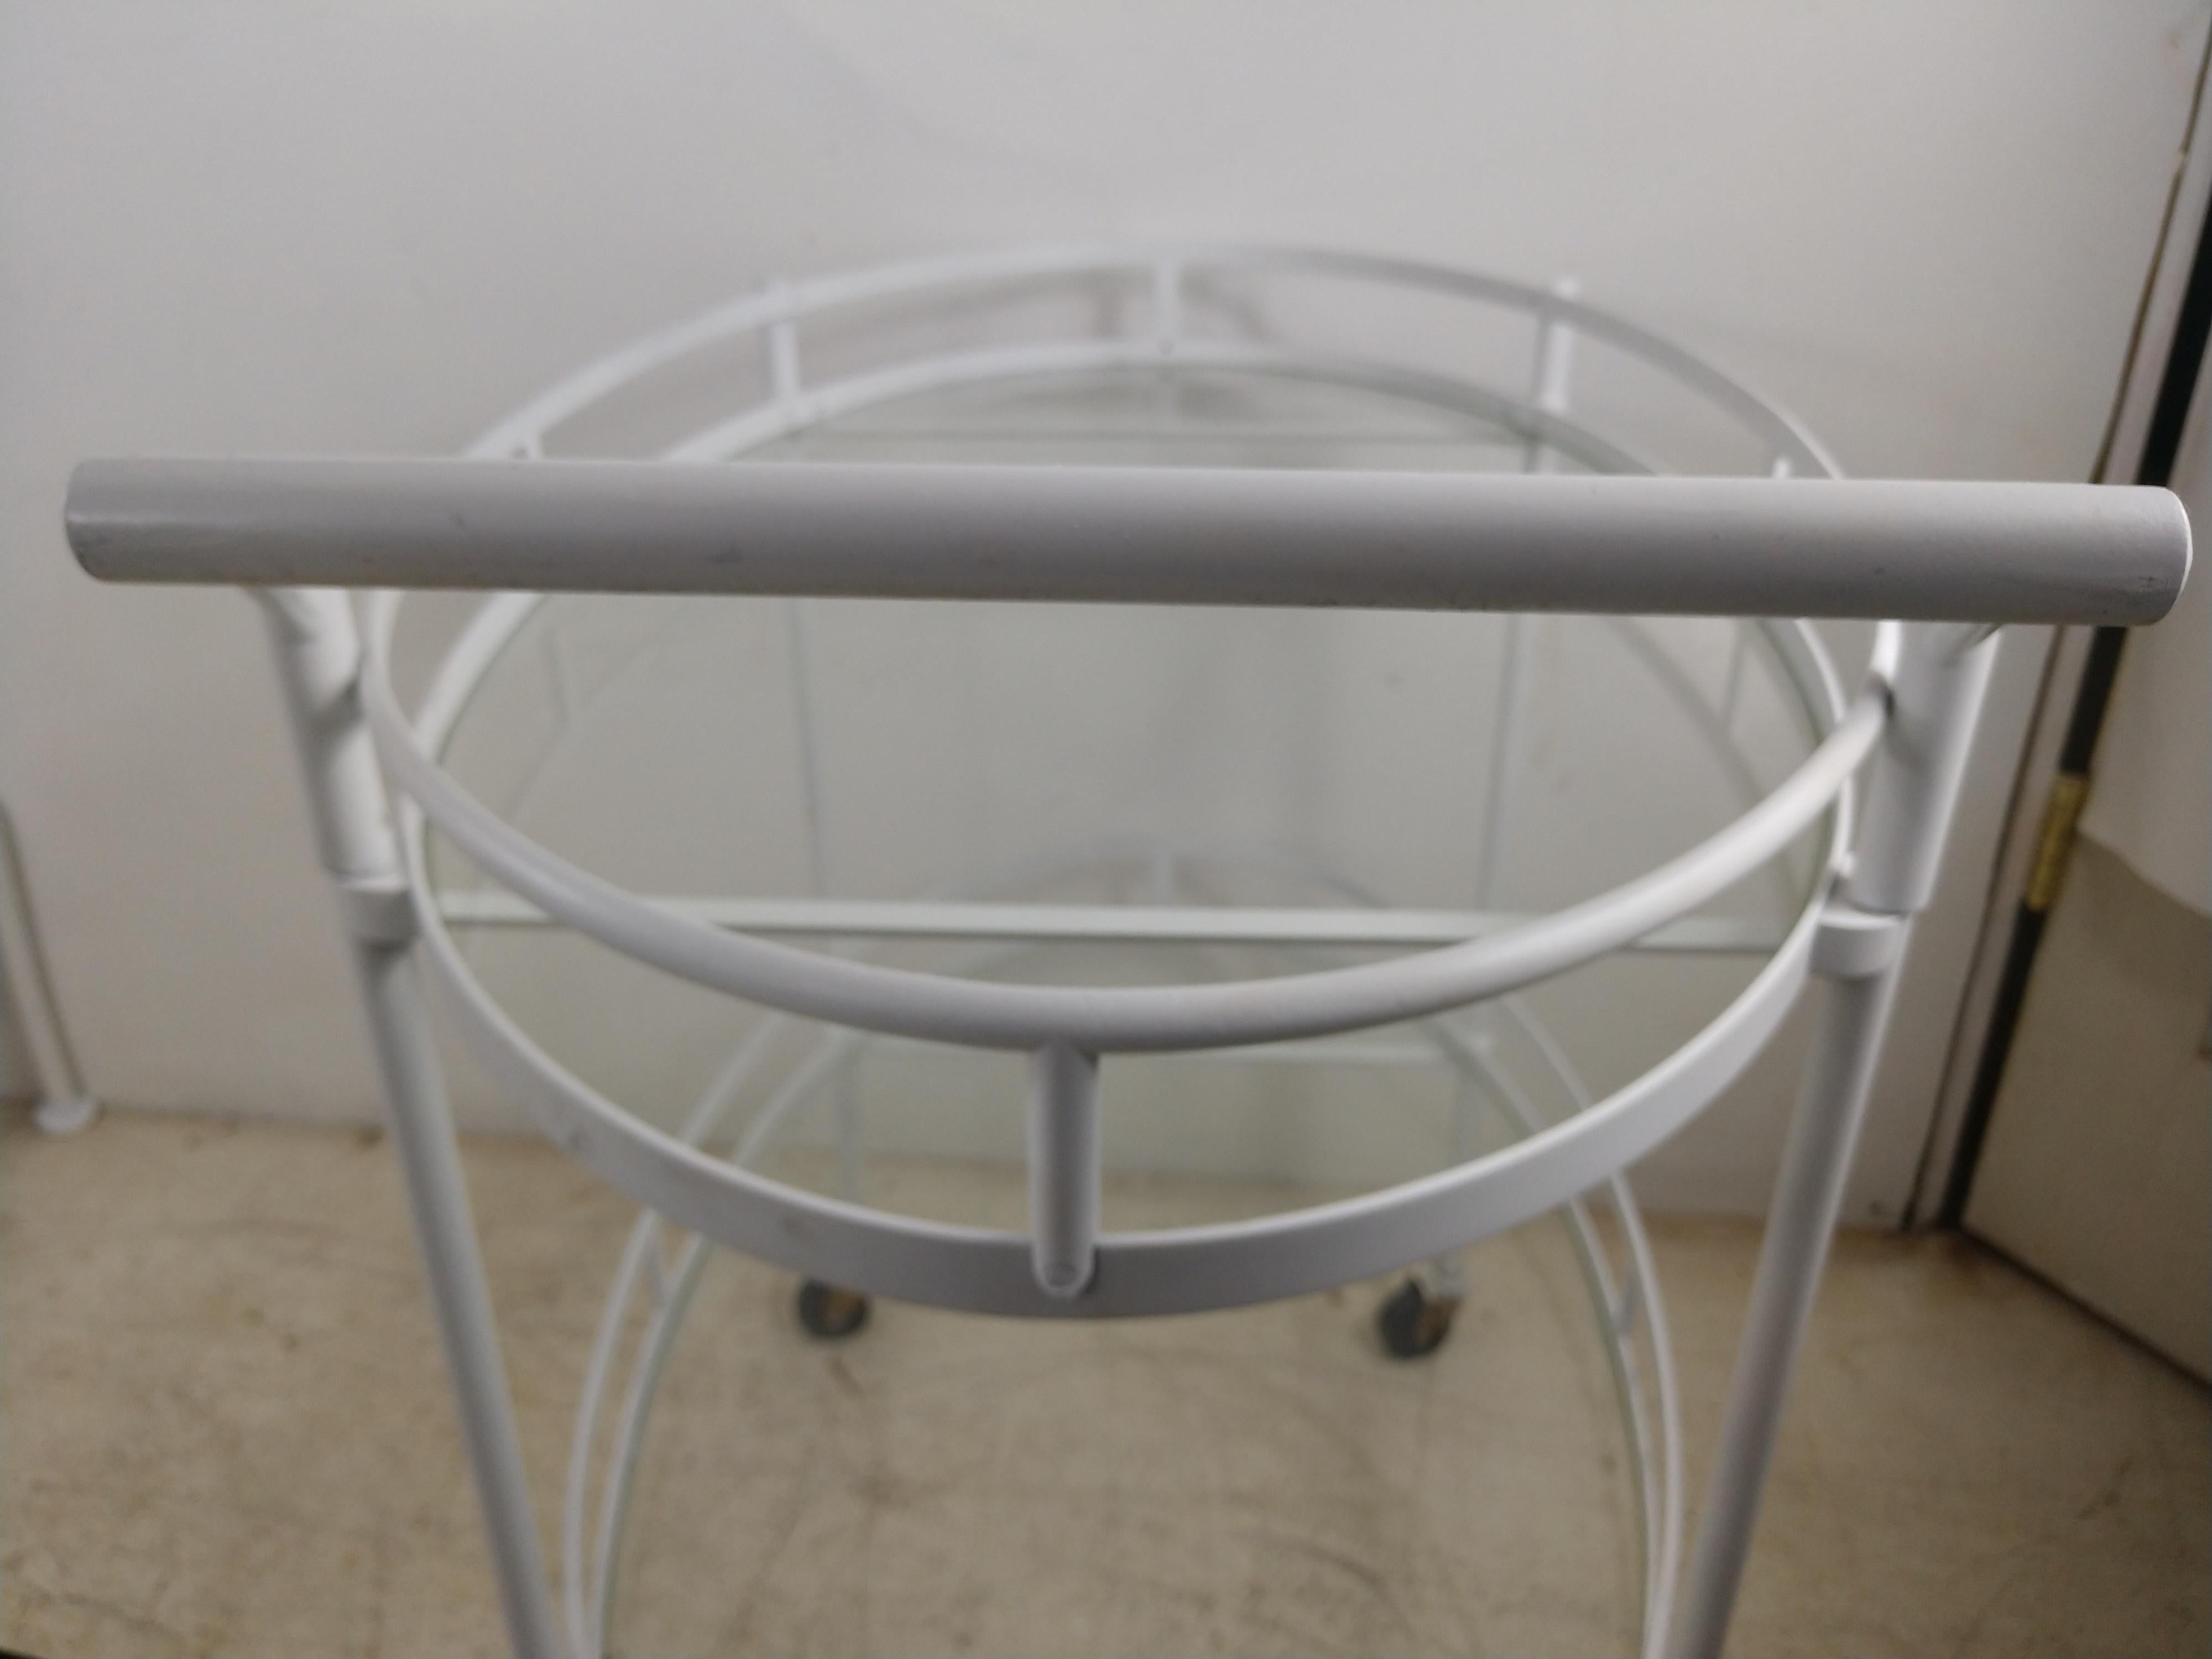 Brass bar cart painted enamel white. Two oval tiers with glass shelves to house your beverages and glassware. Hard plastic wheels which operate freely.